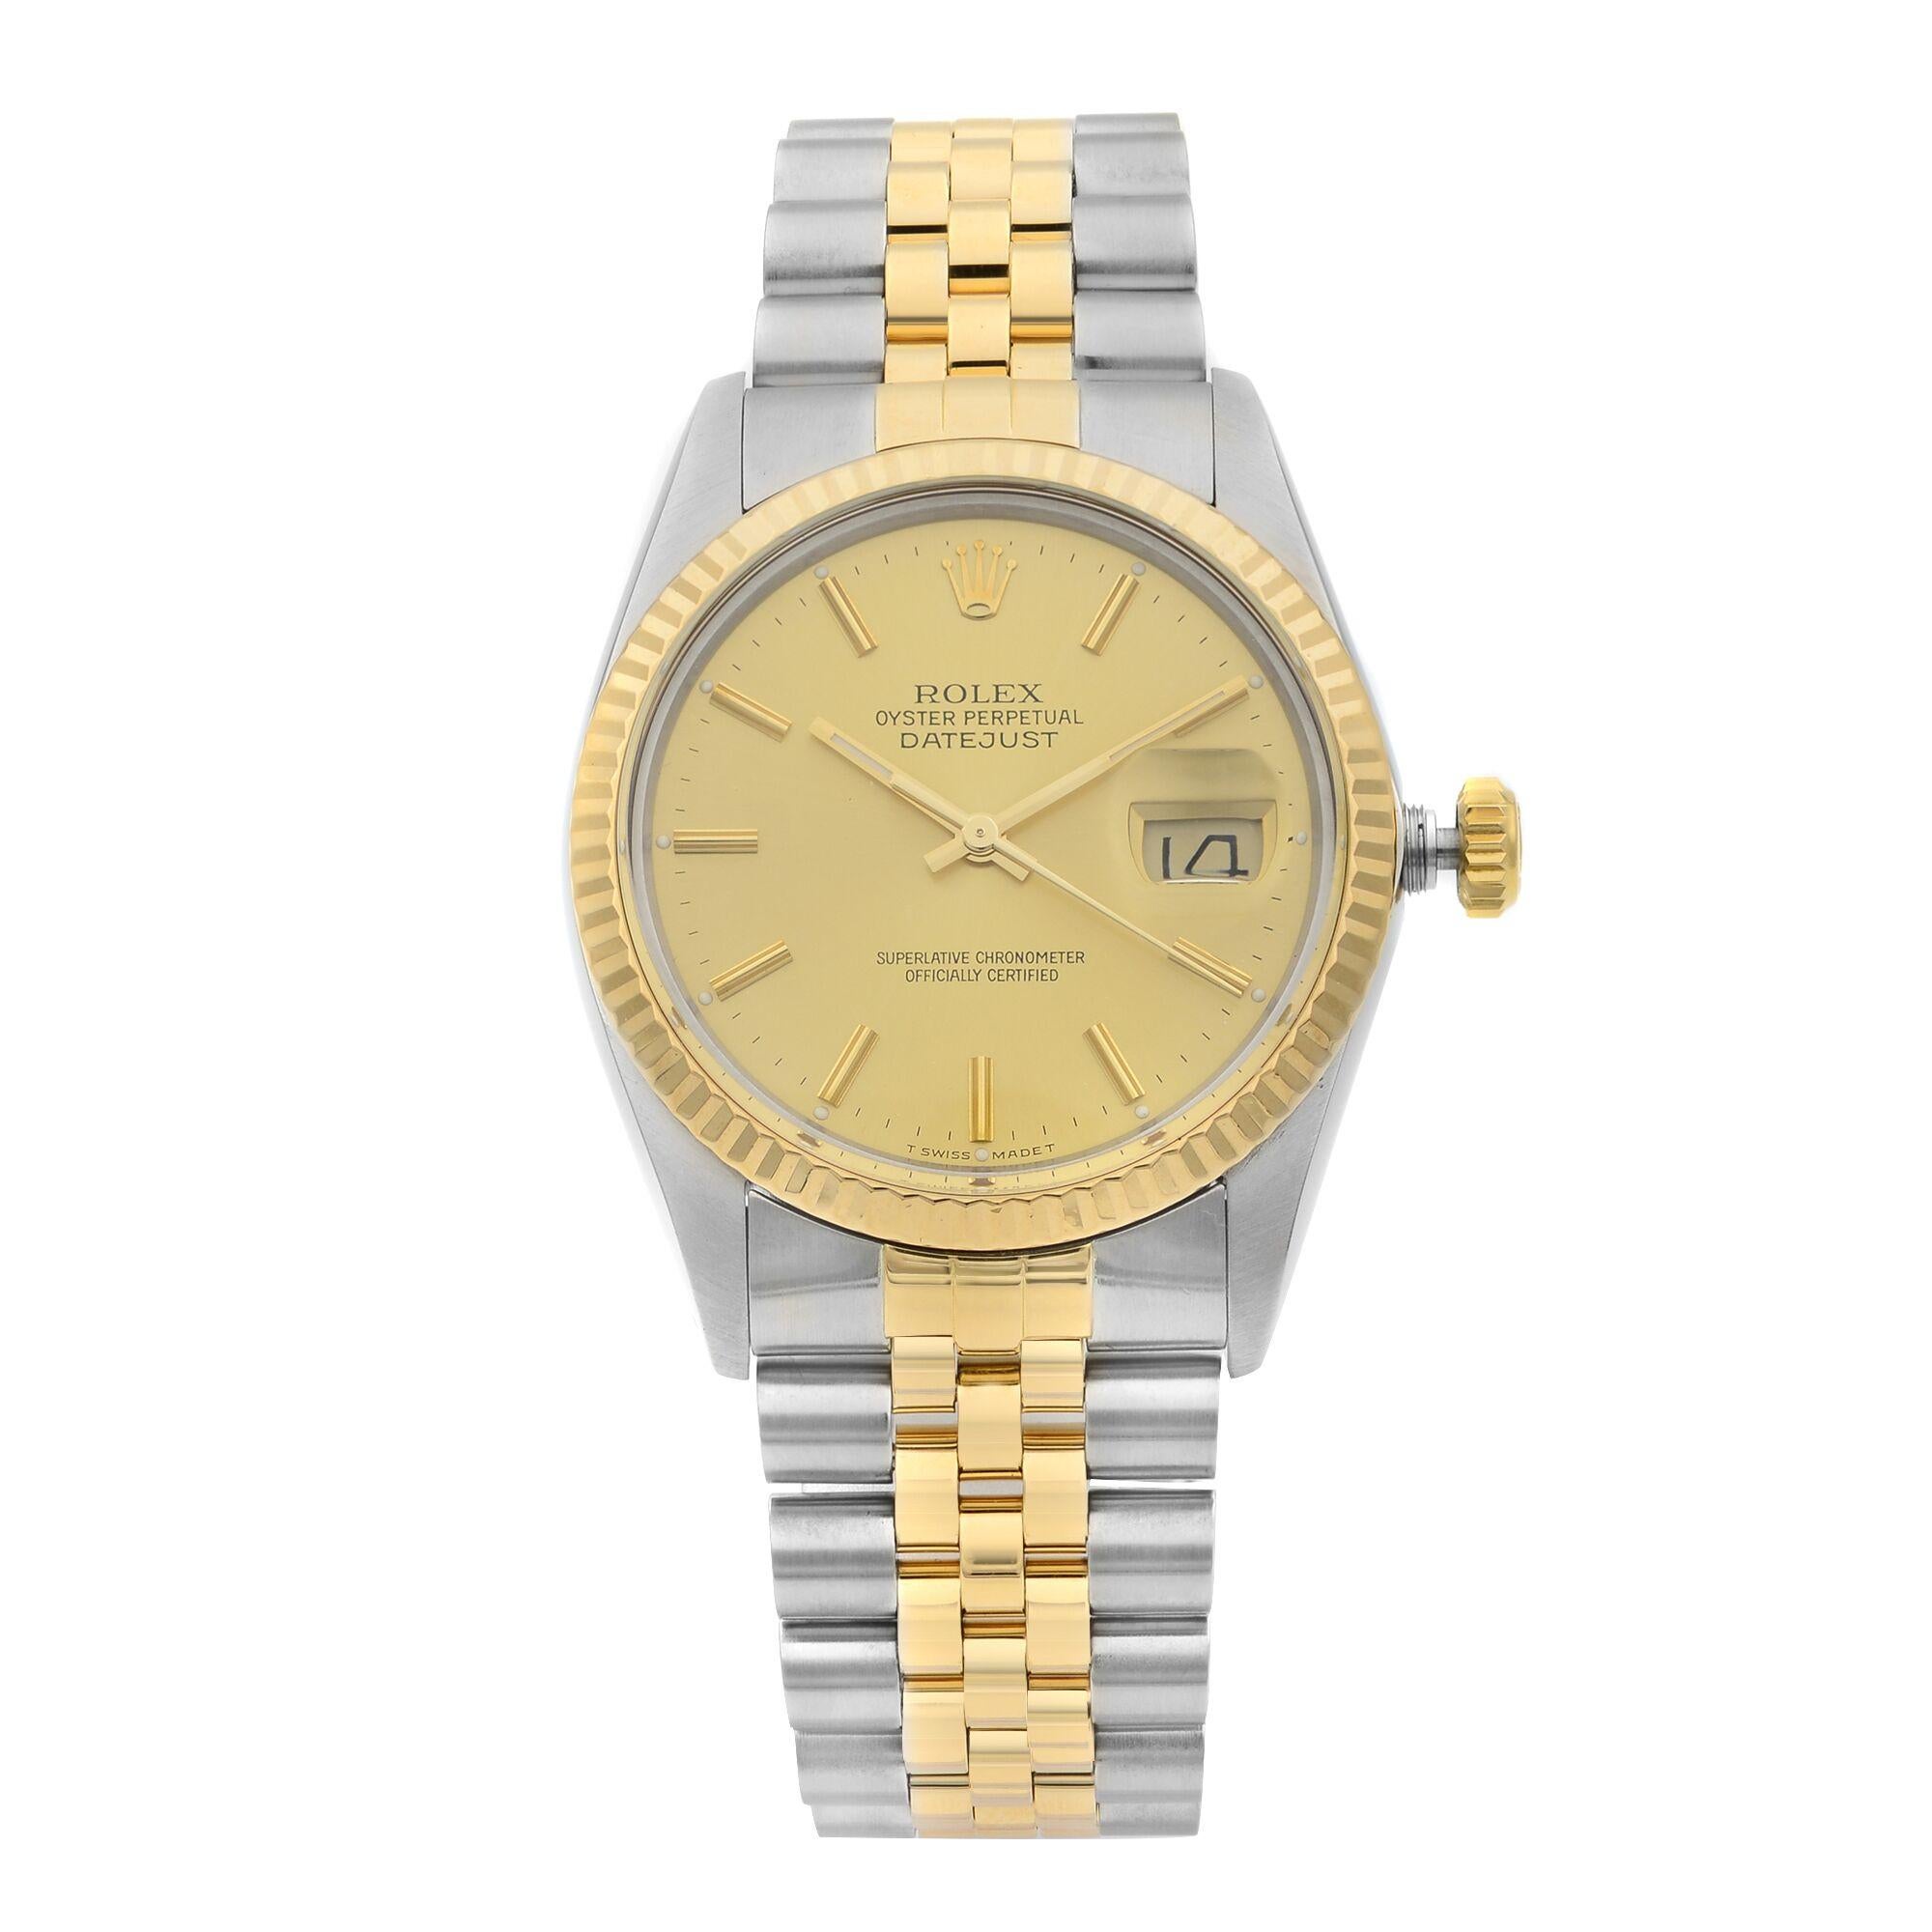 Pre Owned Rolex Datejust 18K Yellow Gold Steel Champagne Dial Automatic Men's Watch 16013. Minor slack on the band. The watch was Produced in 1978. This Beautiful Timepiece Features: Stainless Steel Case with a Stainless Steel & 18k Gold Jubilee